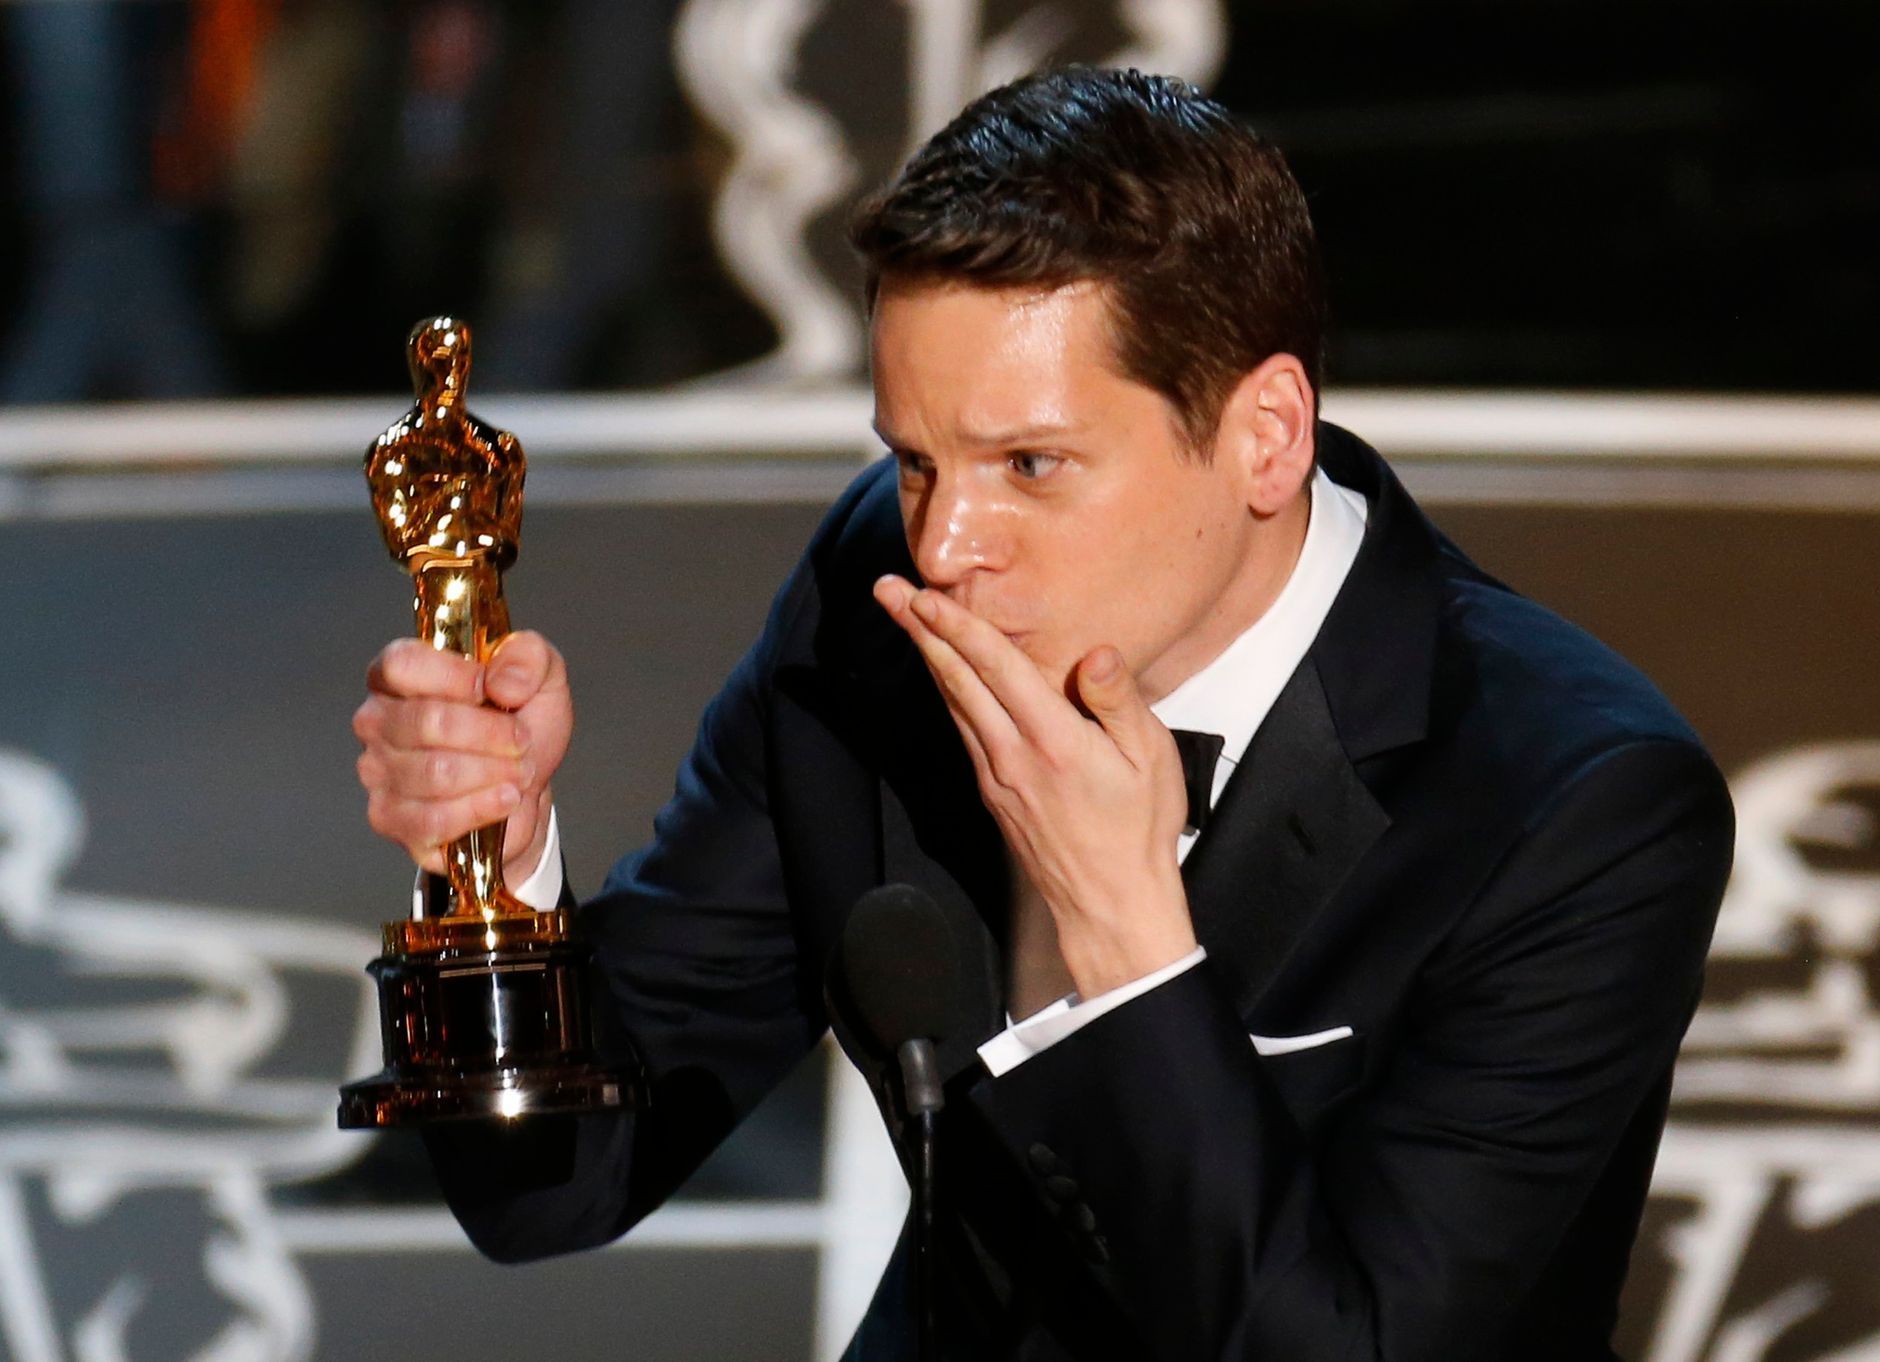 Writer Moore accepts the Oscar for best adapted screenplay for the film &quot;The Imitation Game&quot; during the 87th Academy Awards in Hollywood